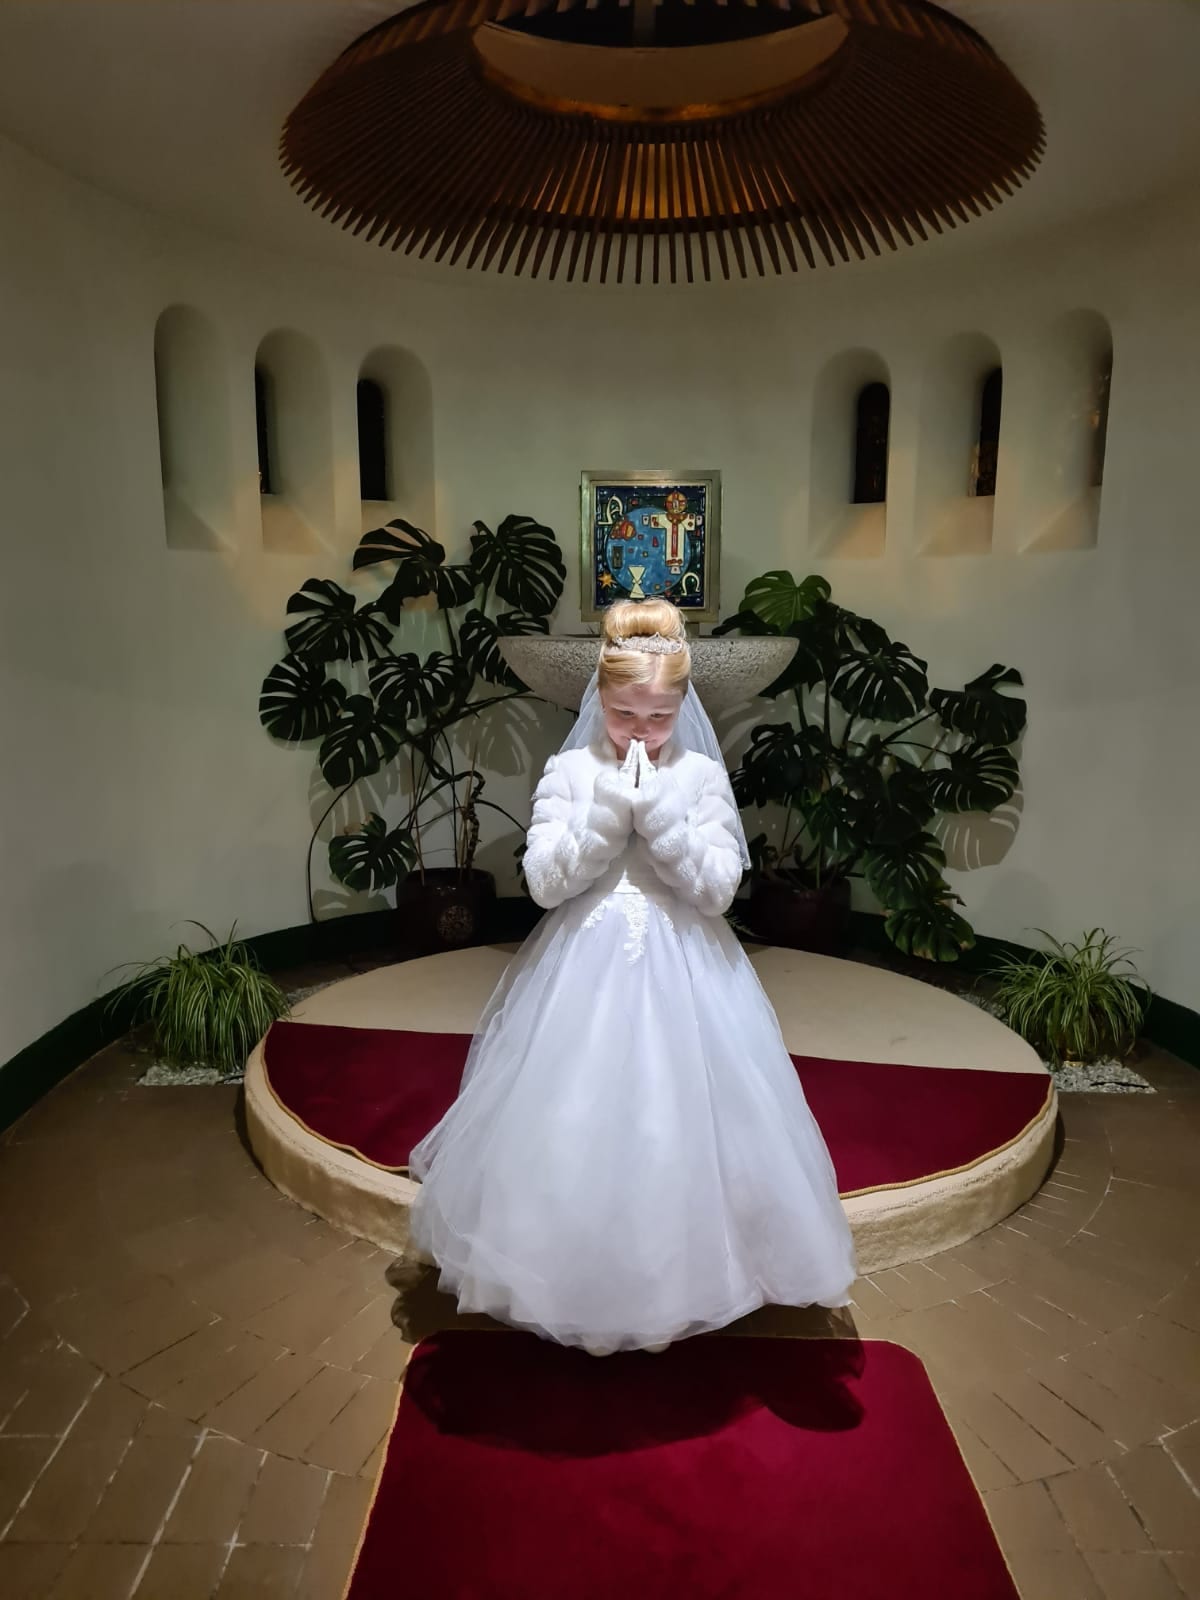 Things to Consider When Buying Your First Communion Dress